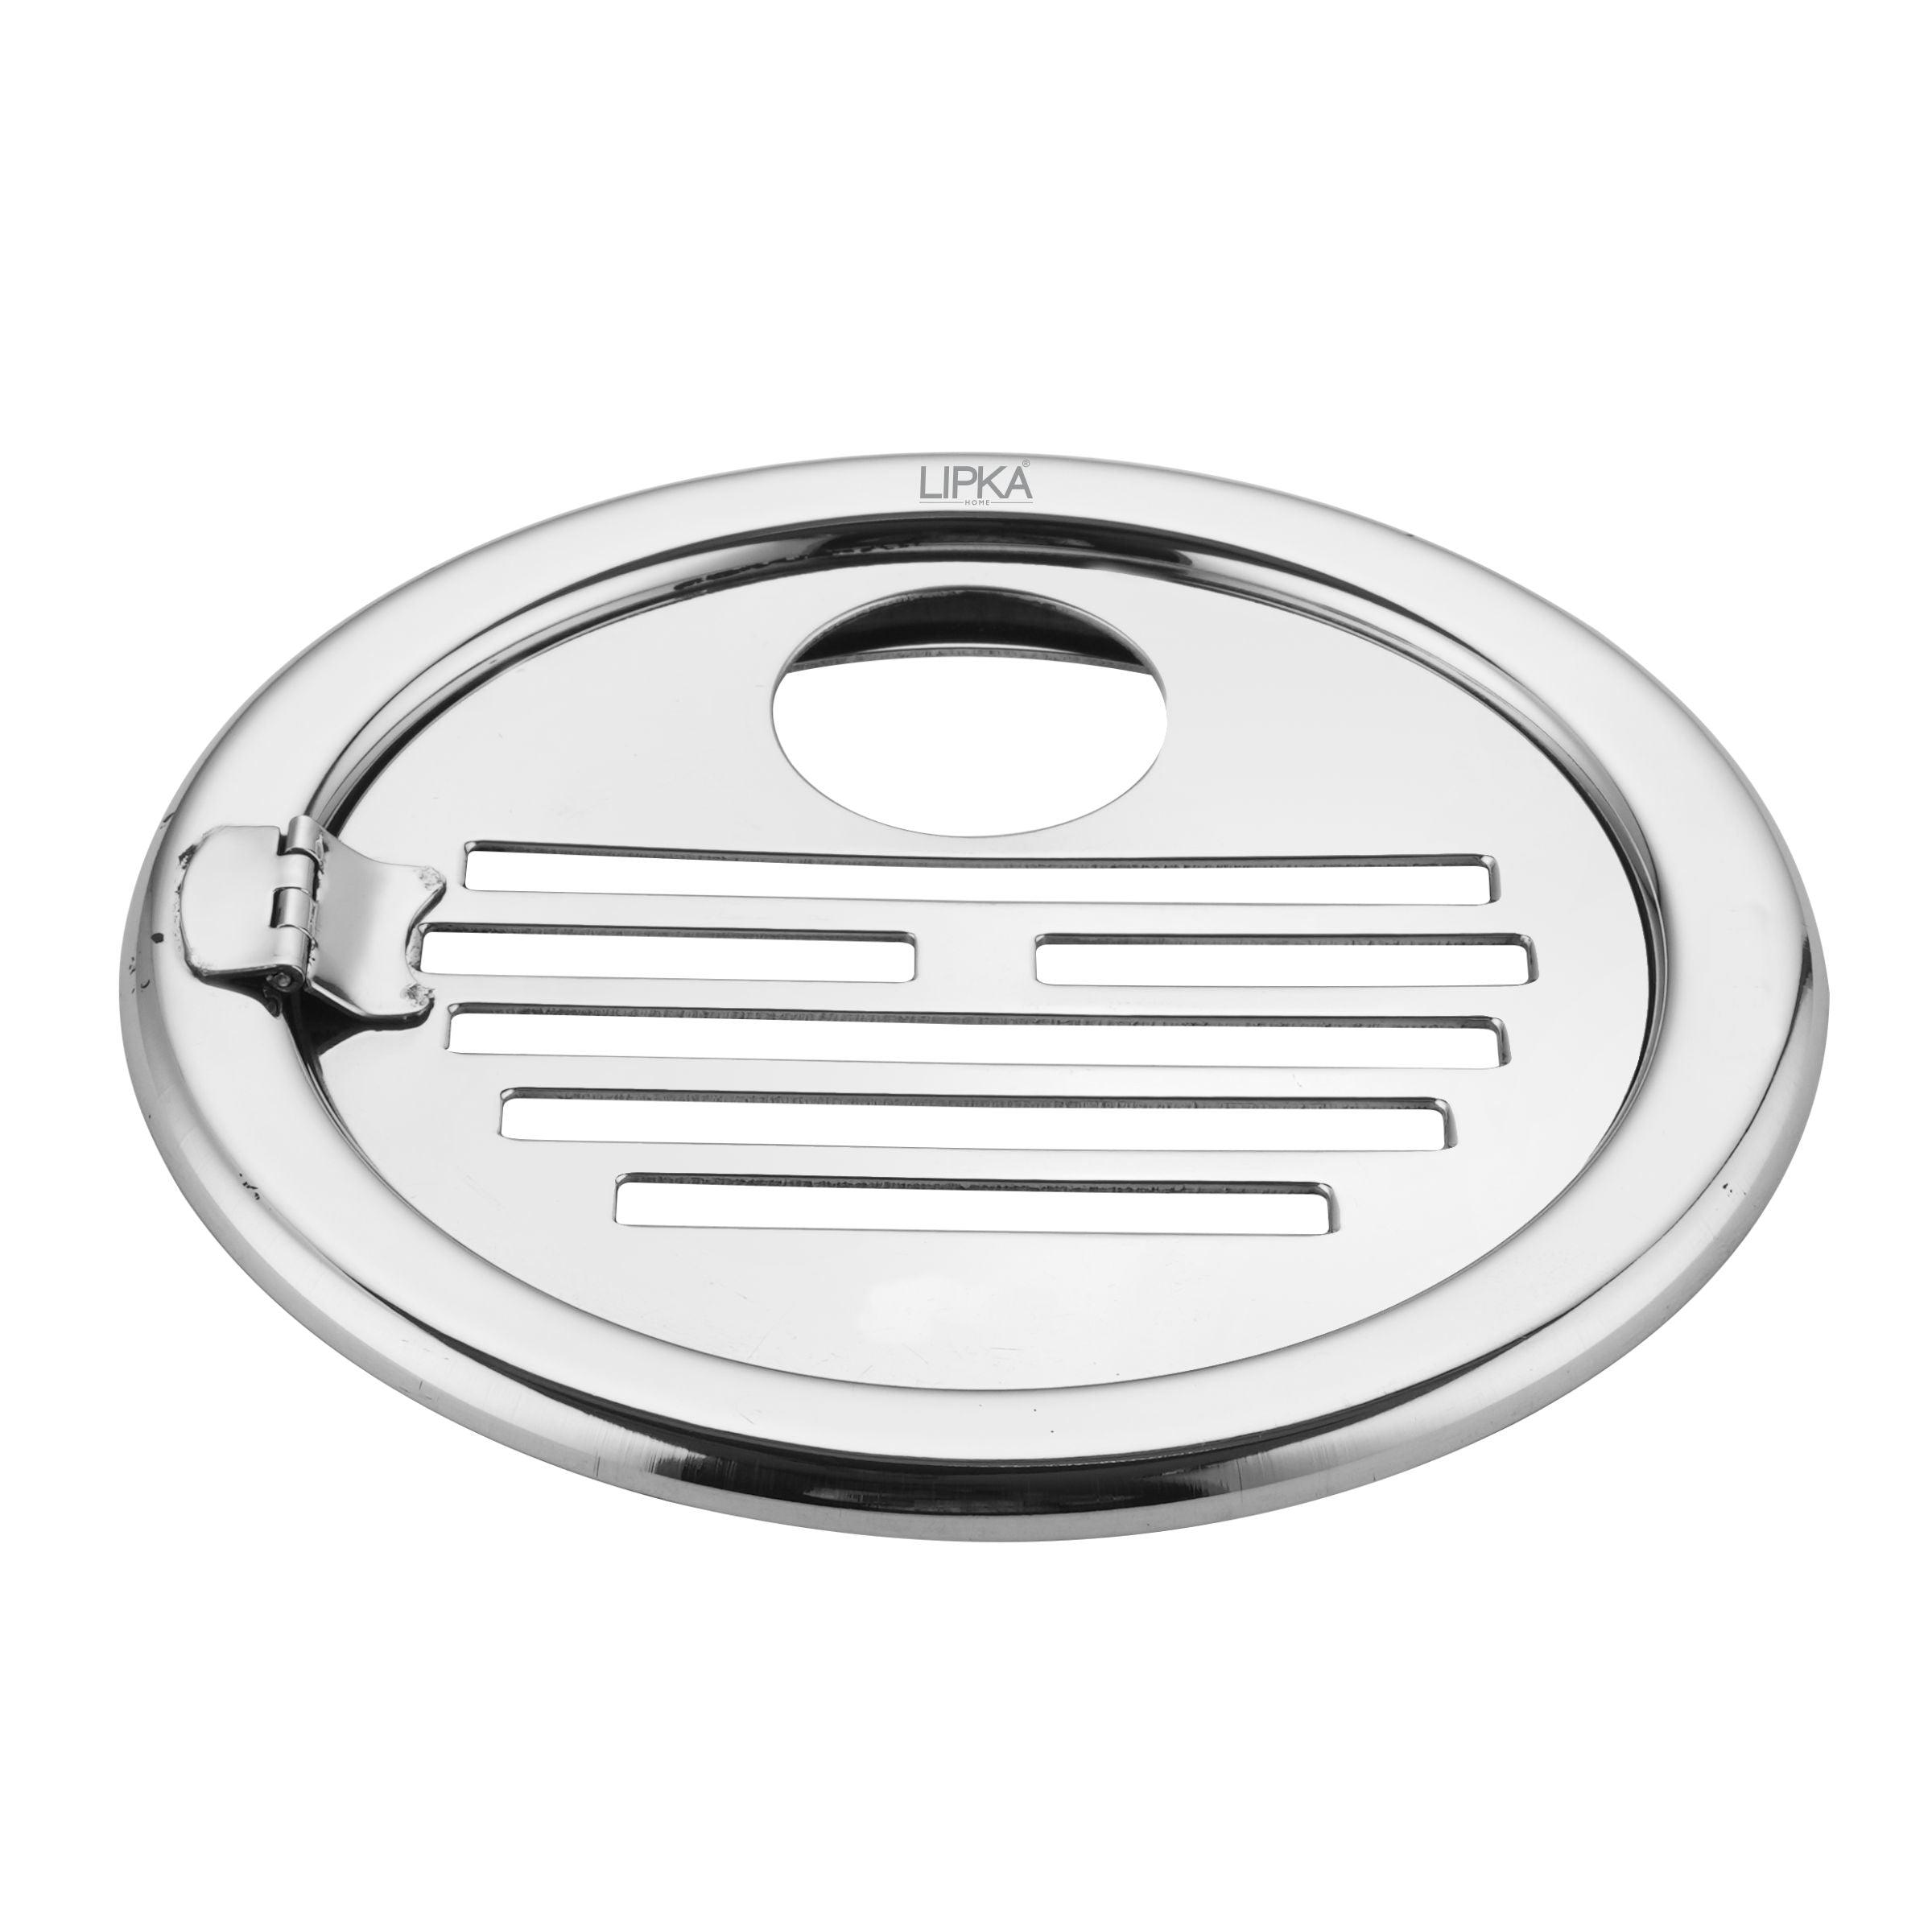 Eon Round Floor Drain with Golden Classic Jali, Hinge & Hole (5 inches) - LIPKA